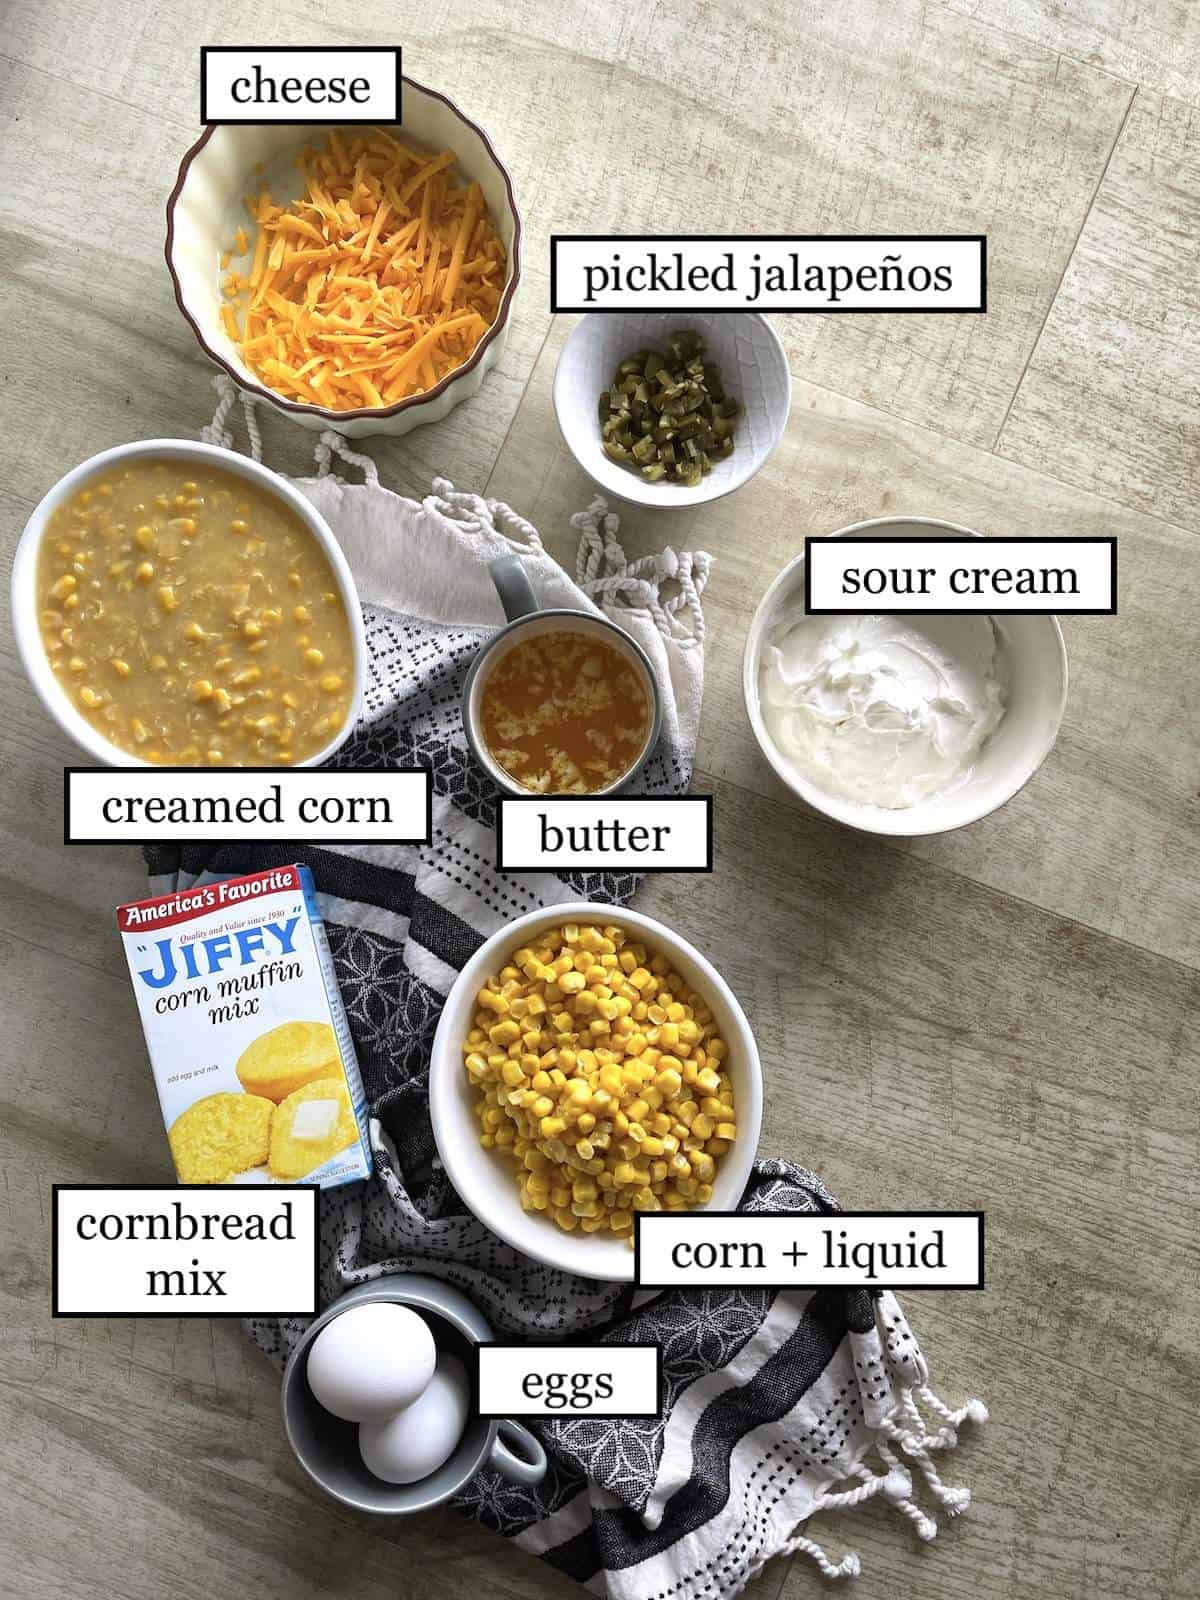 The ingredients in corn pudding, laid out and labeled.